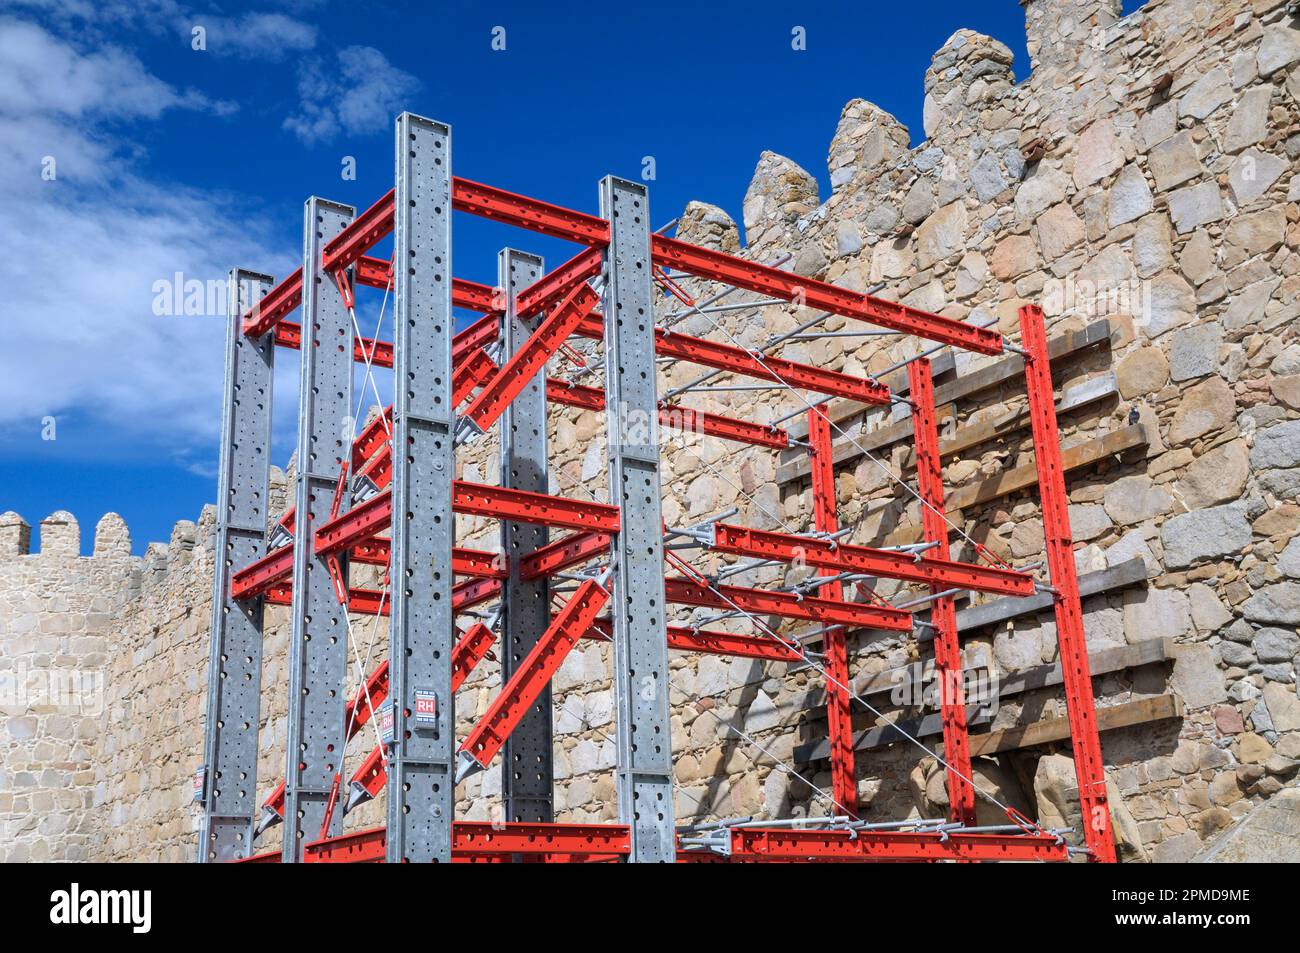 Structural reinforcement scaffolding framework using steel girders for work on repair and preservation of ancient castle walls, Avila, Spain, Europe Stock Photo